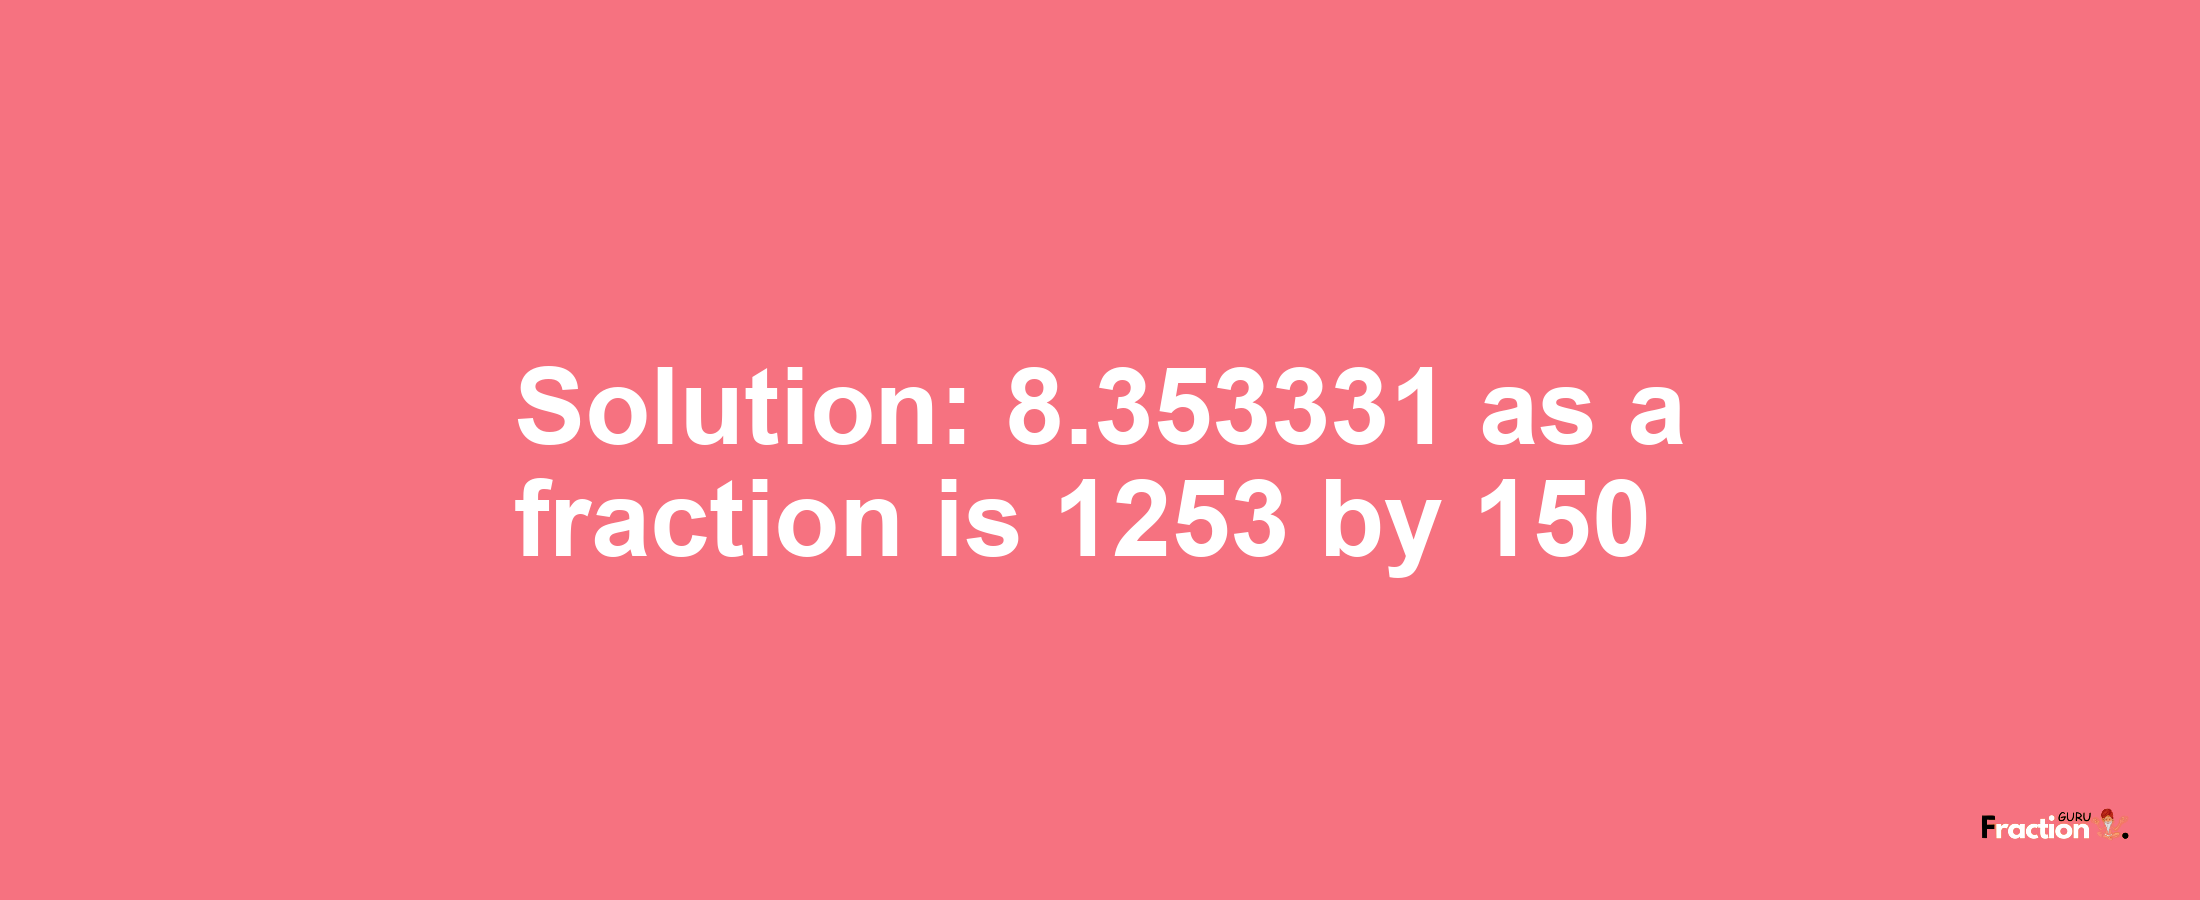 Solution:8.353331 as a fraction is 1253/150